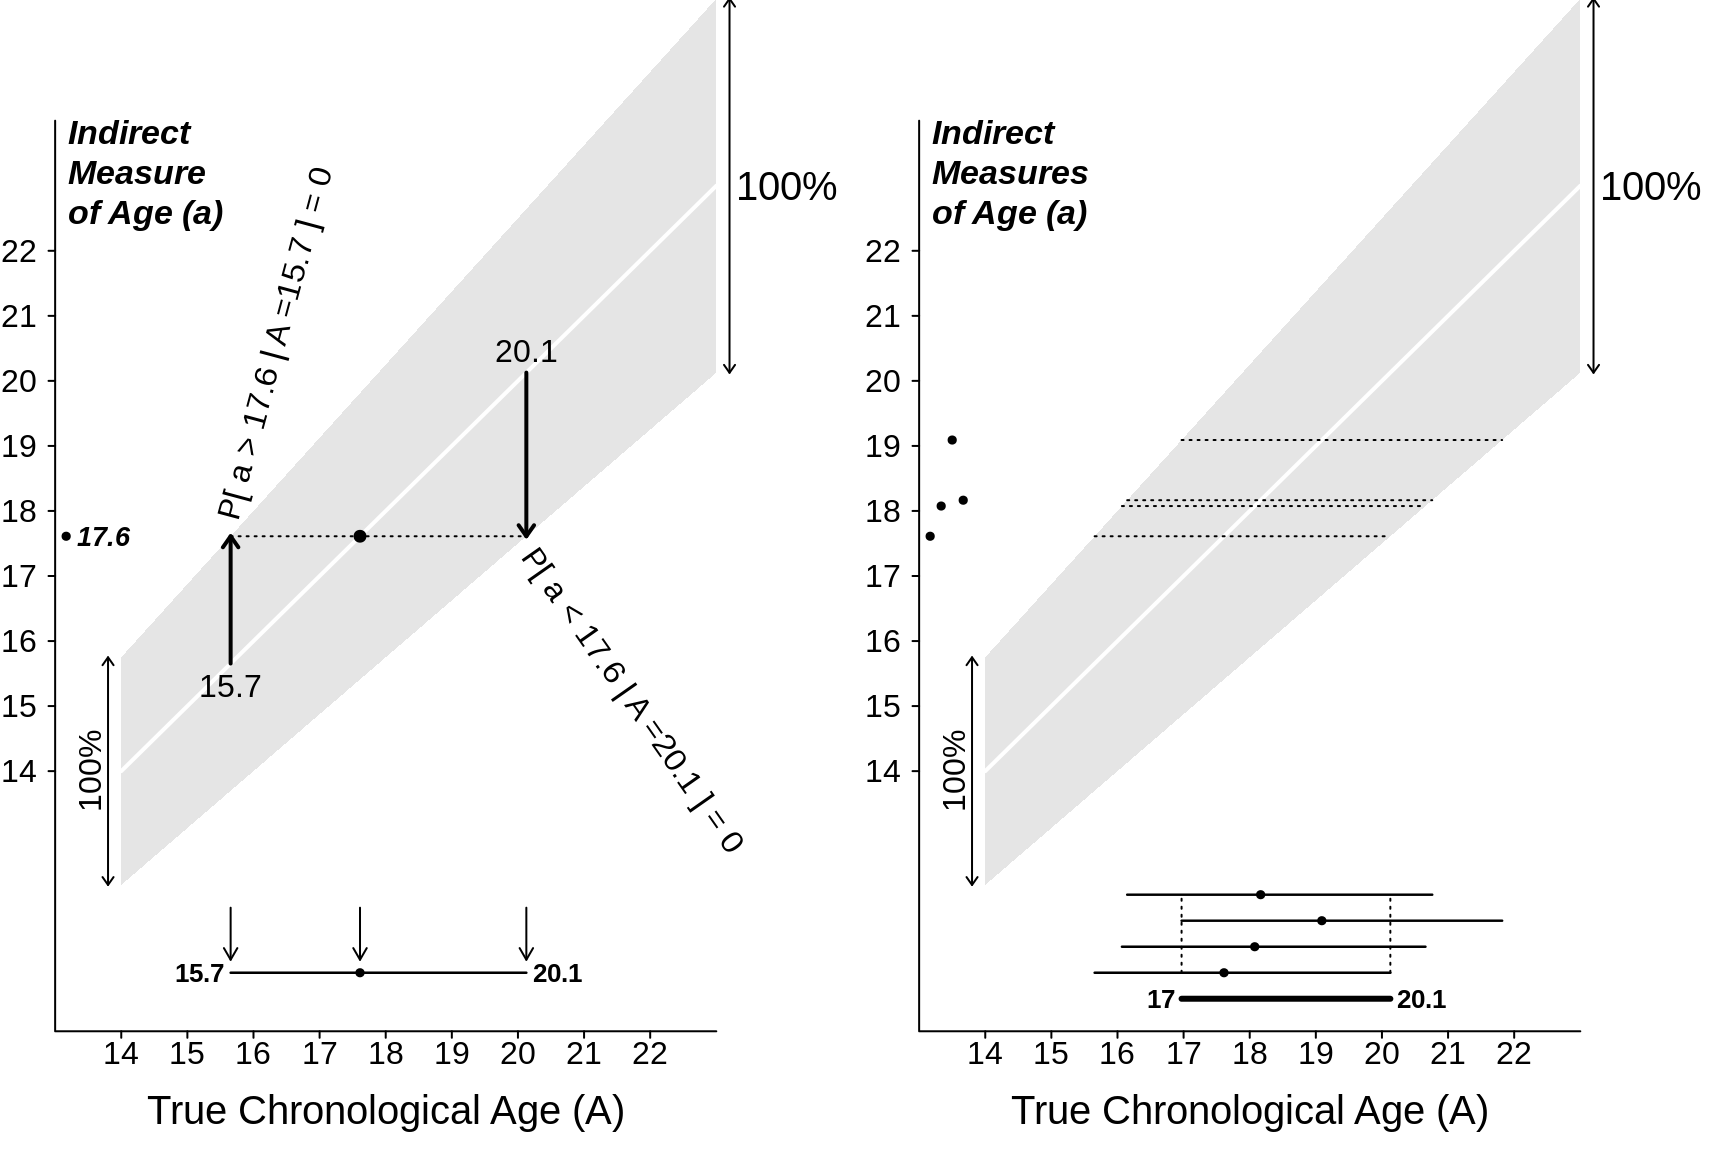 100% Confidence Intervals for a person's chronological age when error distributions (that in this example are wider at the  older ages) are 100% confined within the shaded ranges. Left: based on n = 1 measurement; right: based on n = 4 independent measurements. 